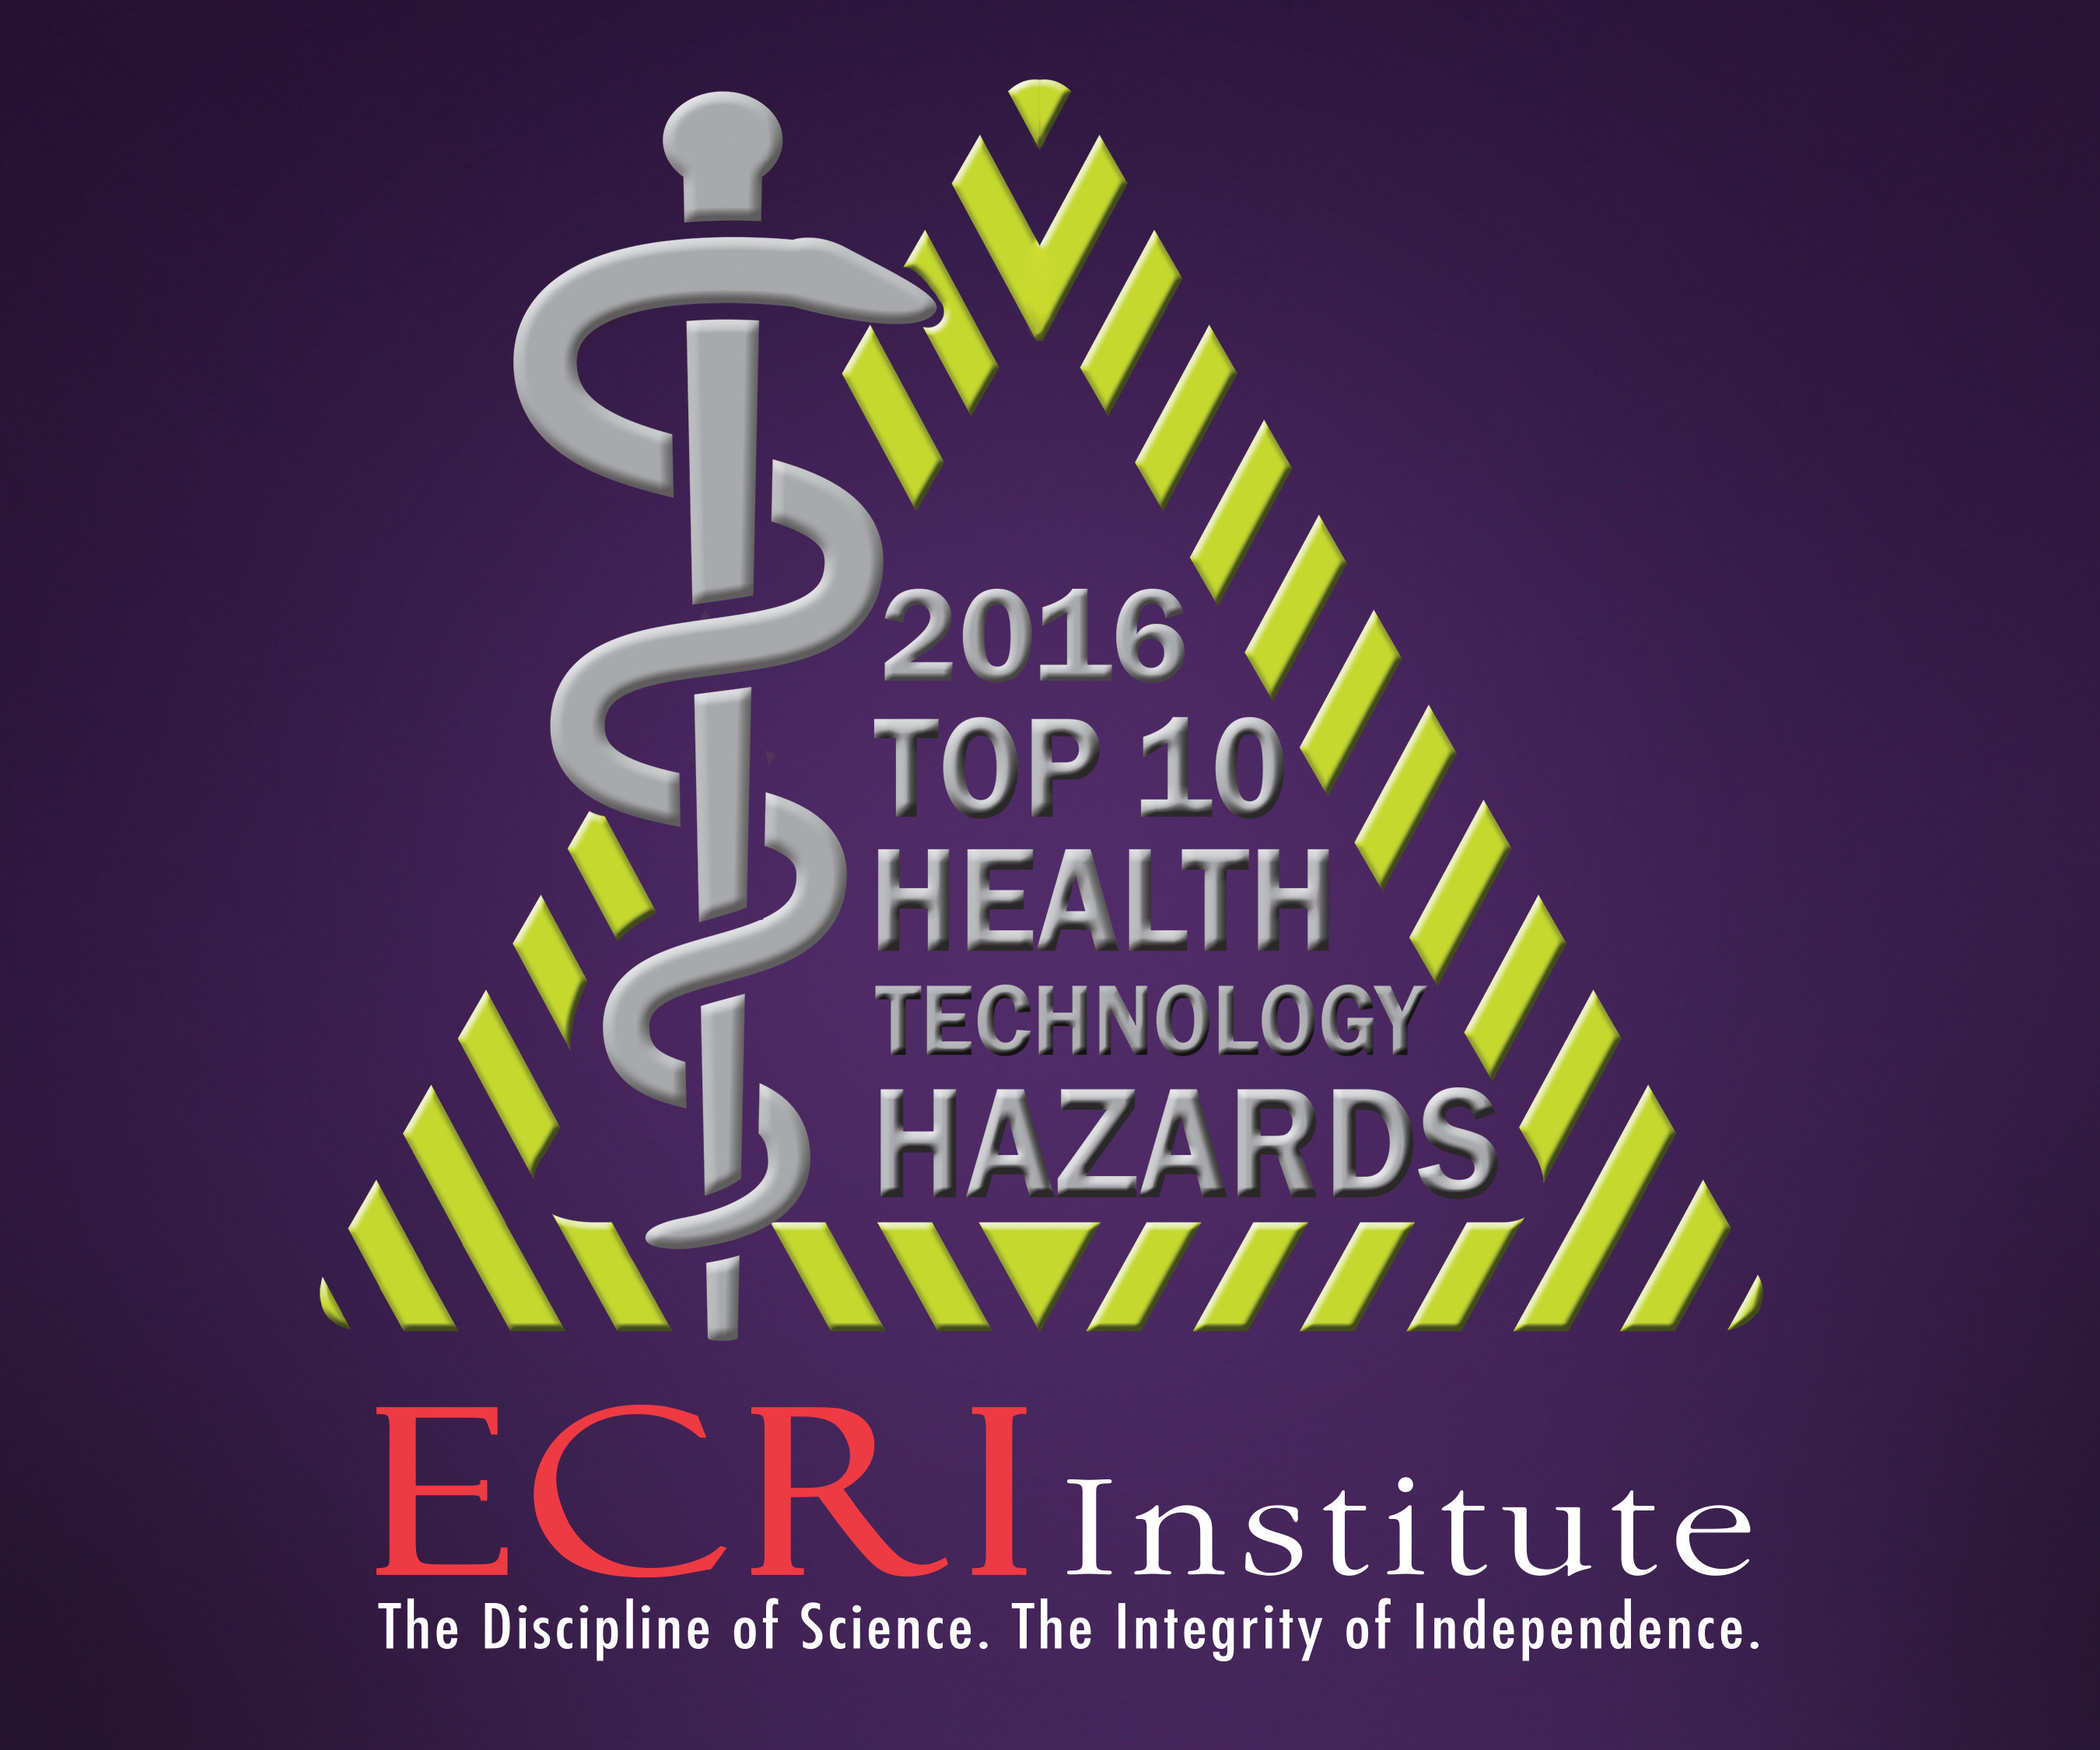 Every year hospitals are blindsided and patients harmed by unexpected health technology hazards. To help hospitals prioritize technology safety efforts that warrant their attention and to reduce patient harm, ECRI Institute publishes an annual list of top 10 health technology hazards. The 2016 list, released today, includes both high-profile and unexpected issues. To download for free, go to www.ecri.org/2016hazards.